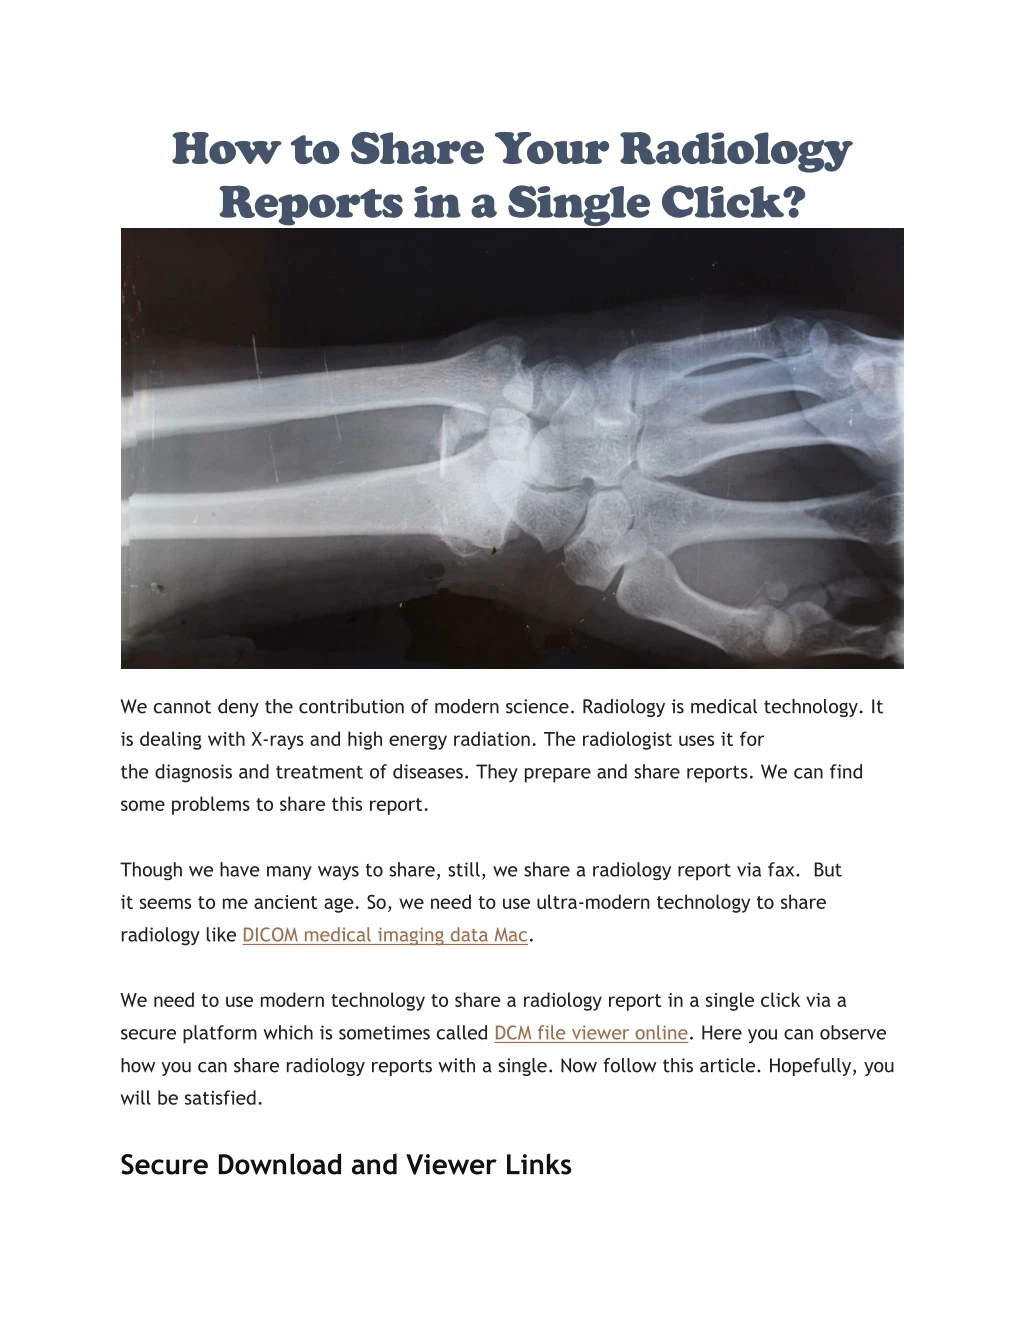 how to share your radiology reports in a single